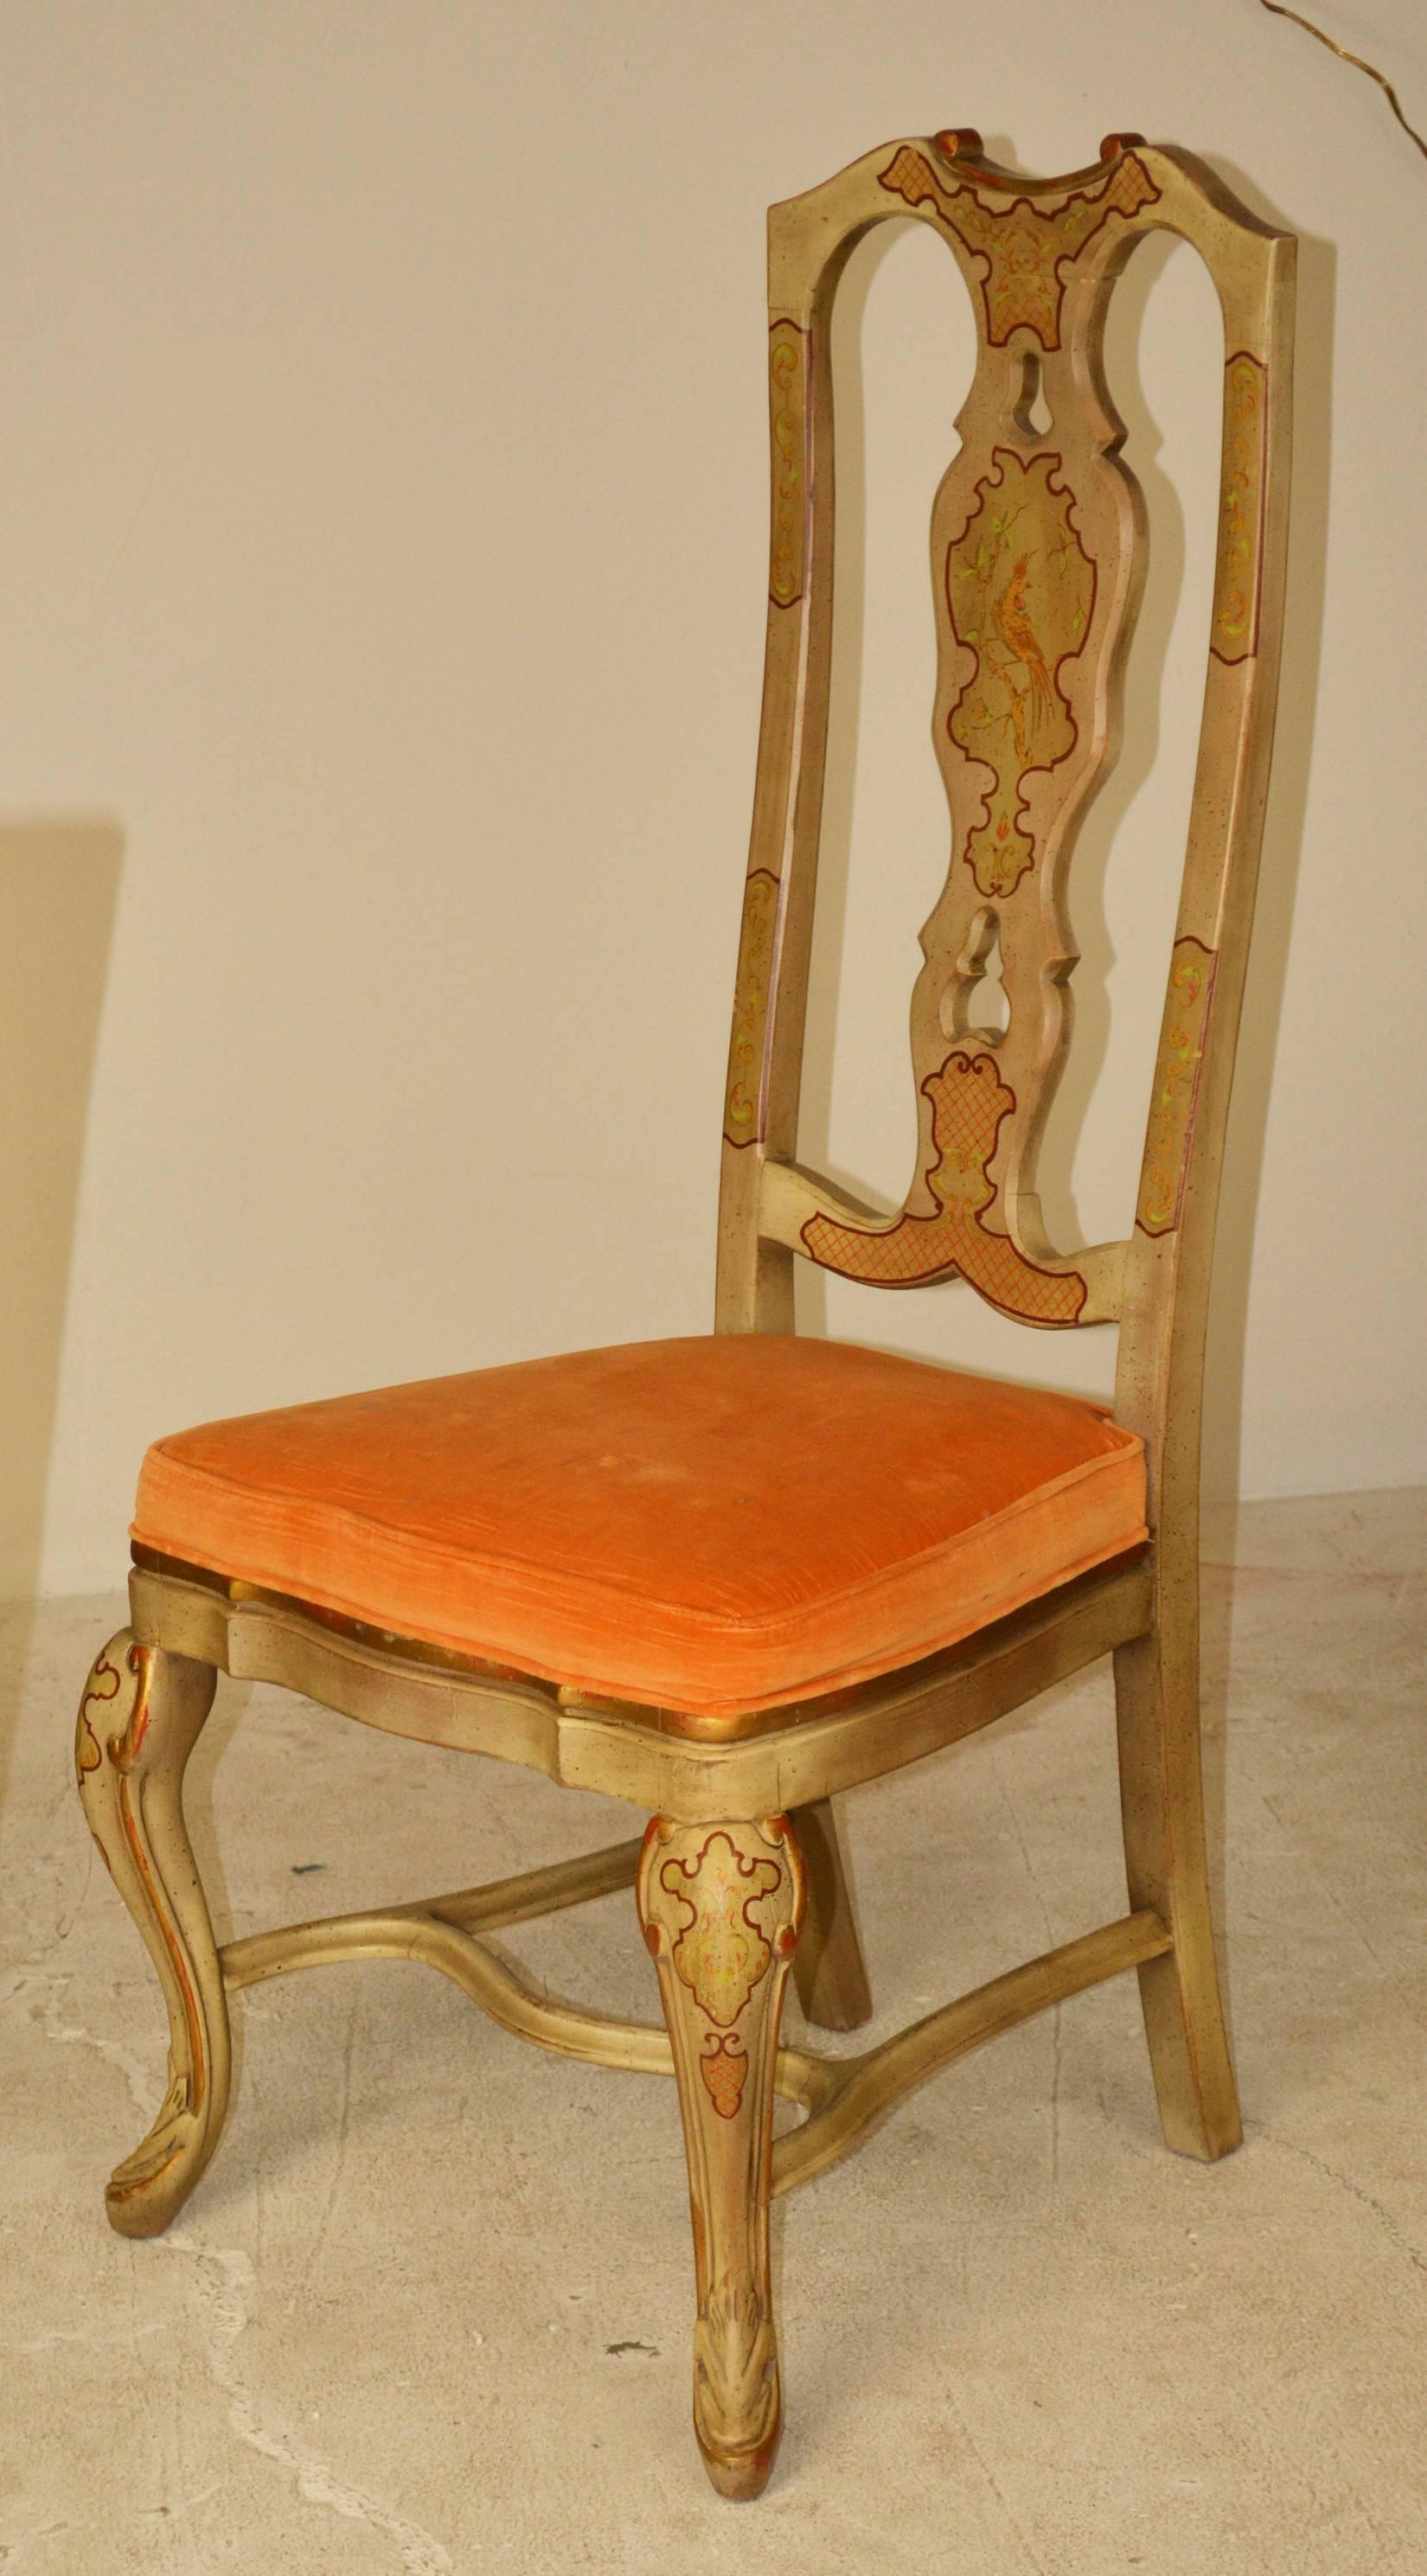 Very Palm Beach! A great set of Queen Anne style dining chairs with painted Chinoiserie decoration. Beautiful carved cabriole legs and curved stretchers. Priced as a set of six, with an additional set of four available separately.